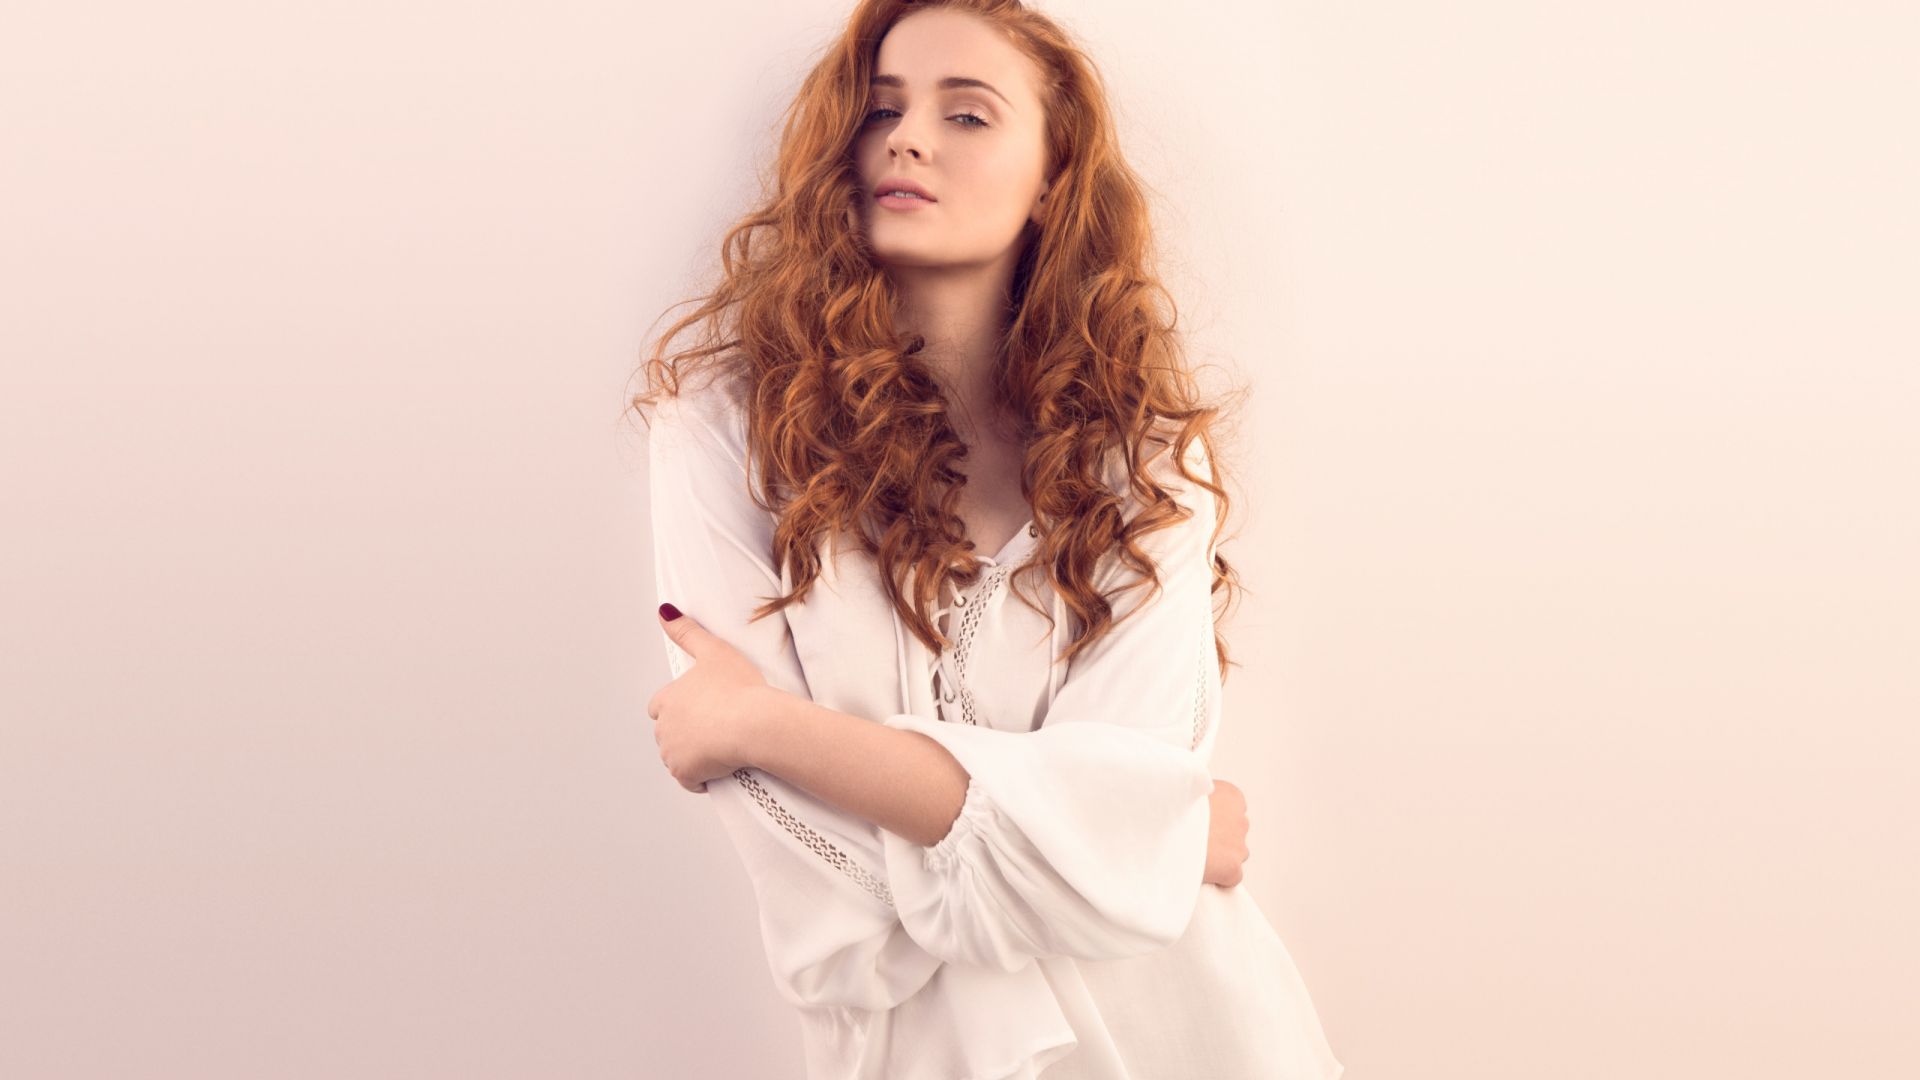 Sophie Turner Photoshoot in White Dress Wallpapers